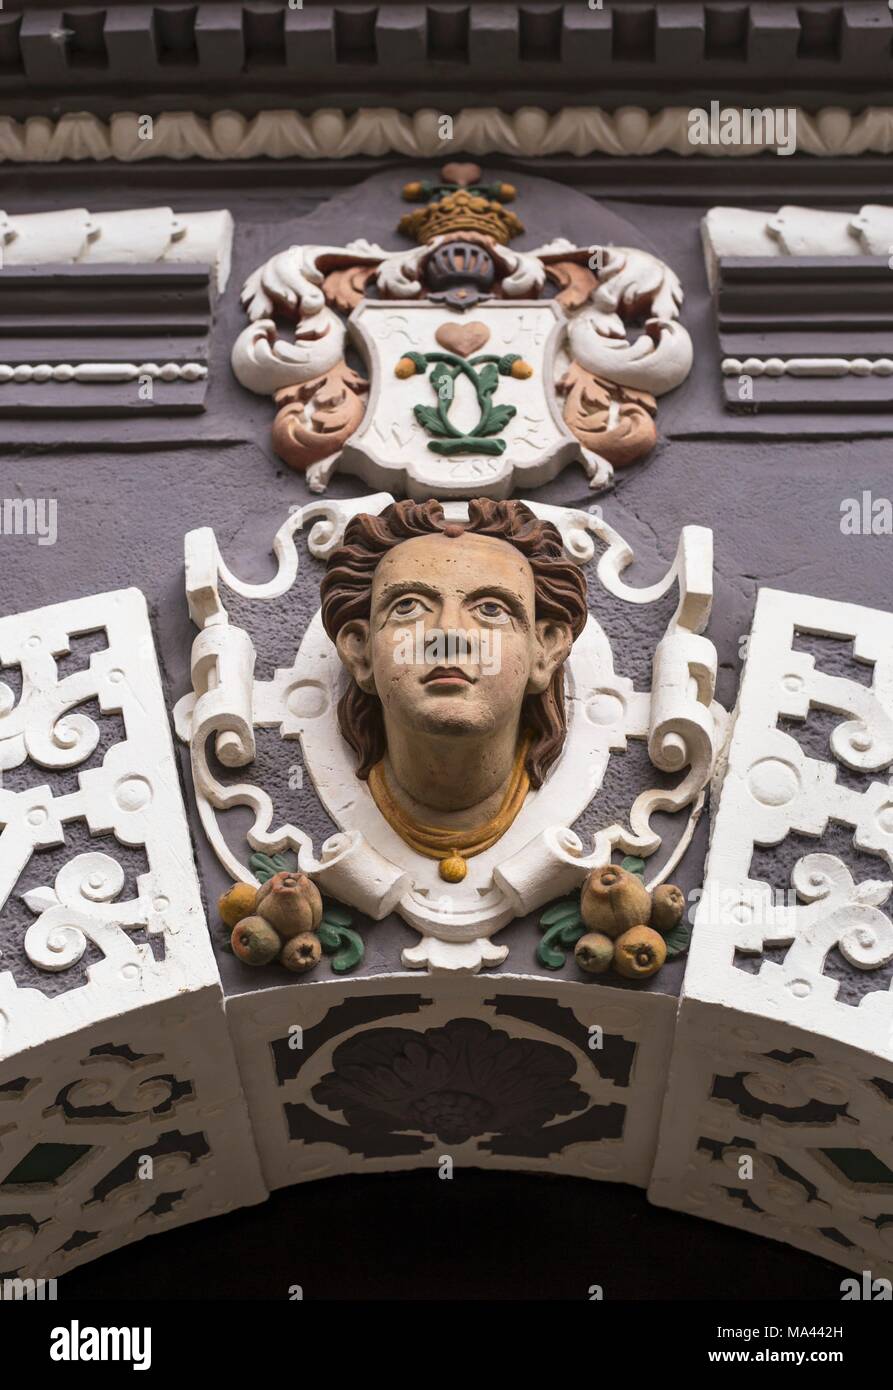 A figure on the 'Haus zum Stockfisch' building in Erfurt, Thuringia, Germany Stock Photo